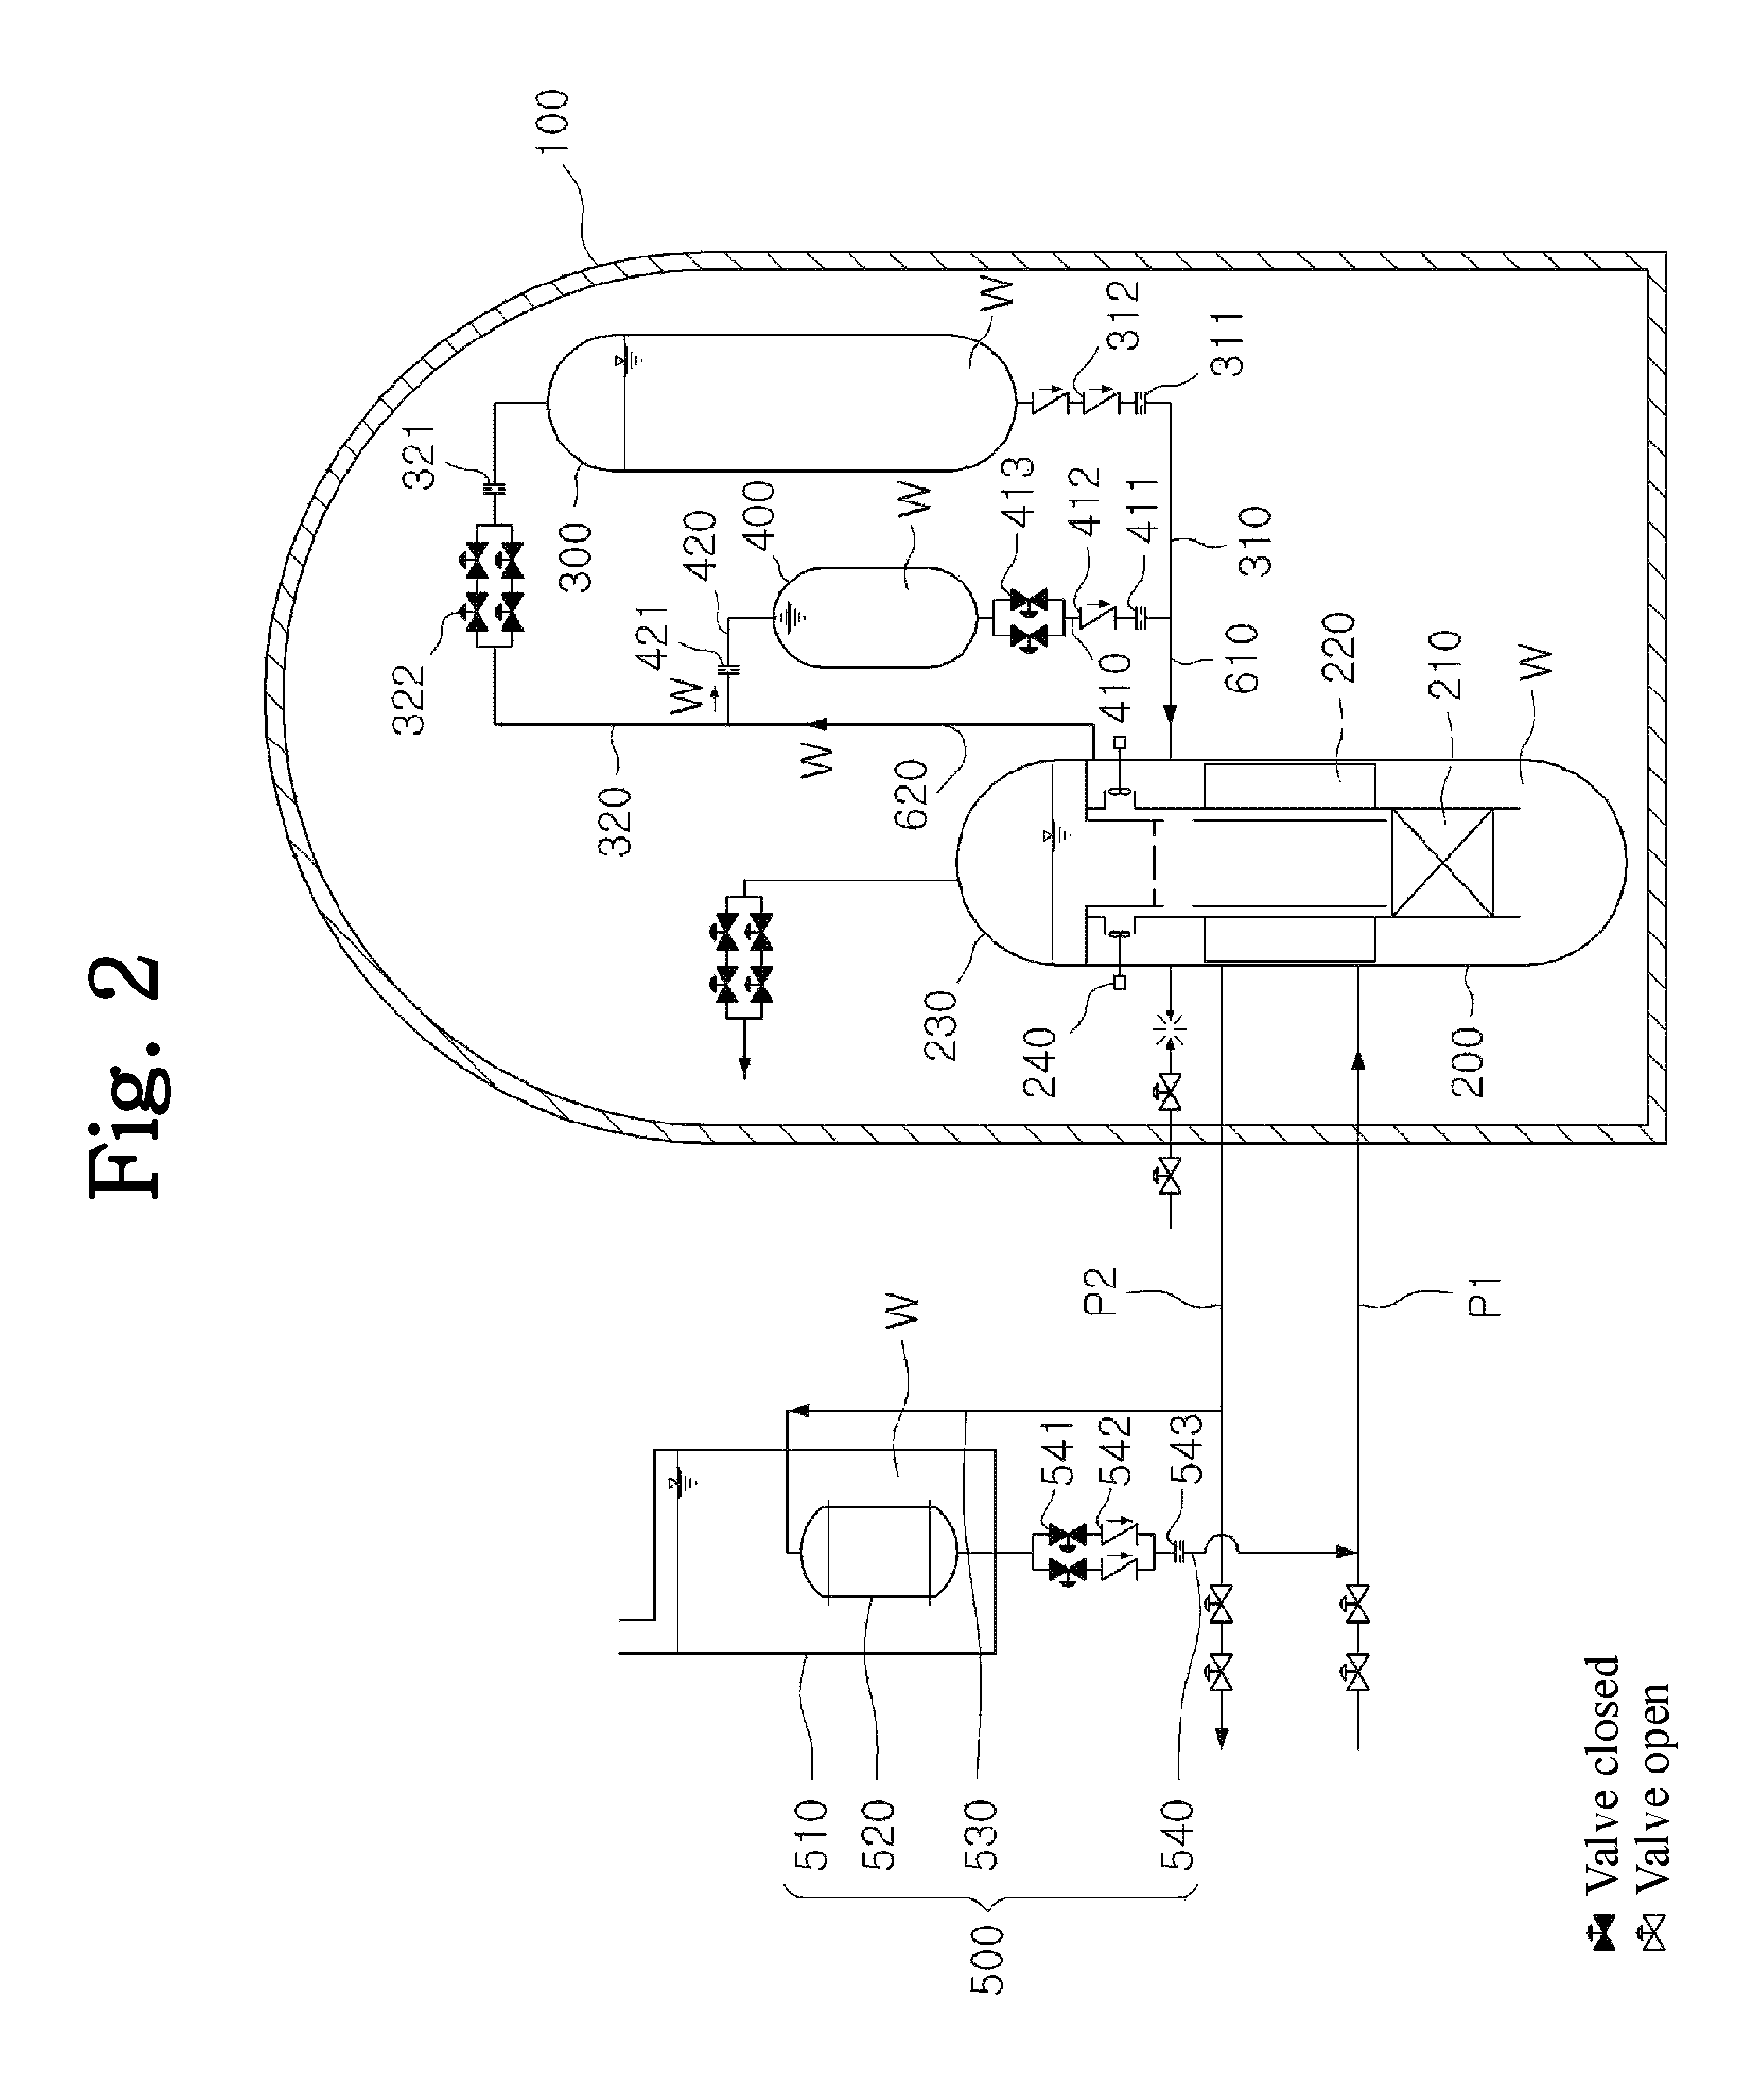 Passive safety system of integral reactor